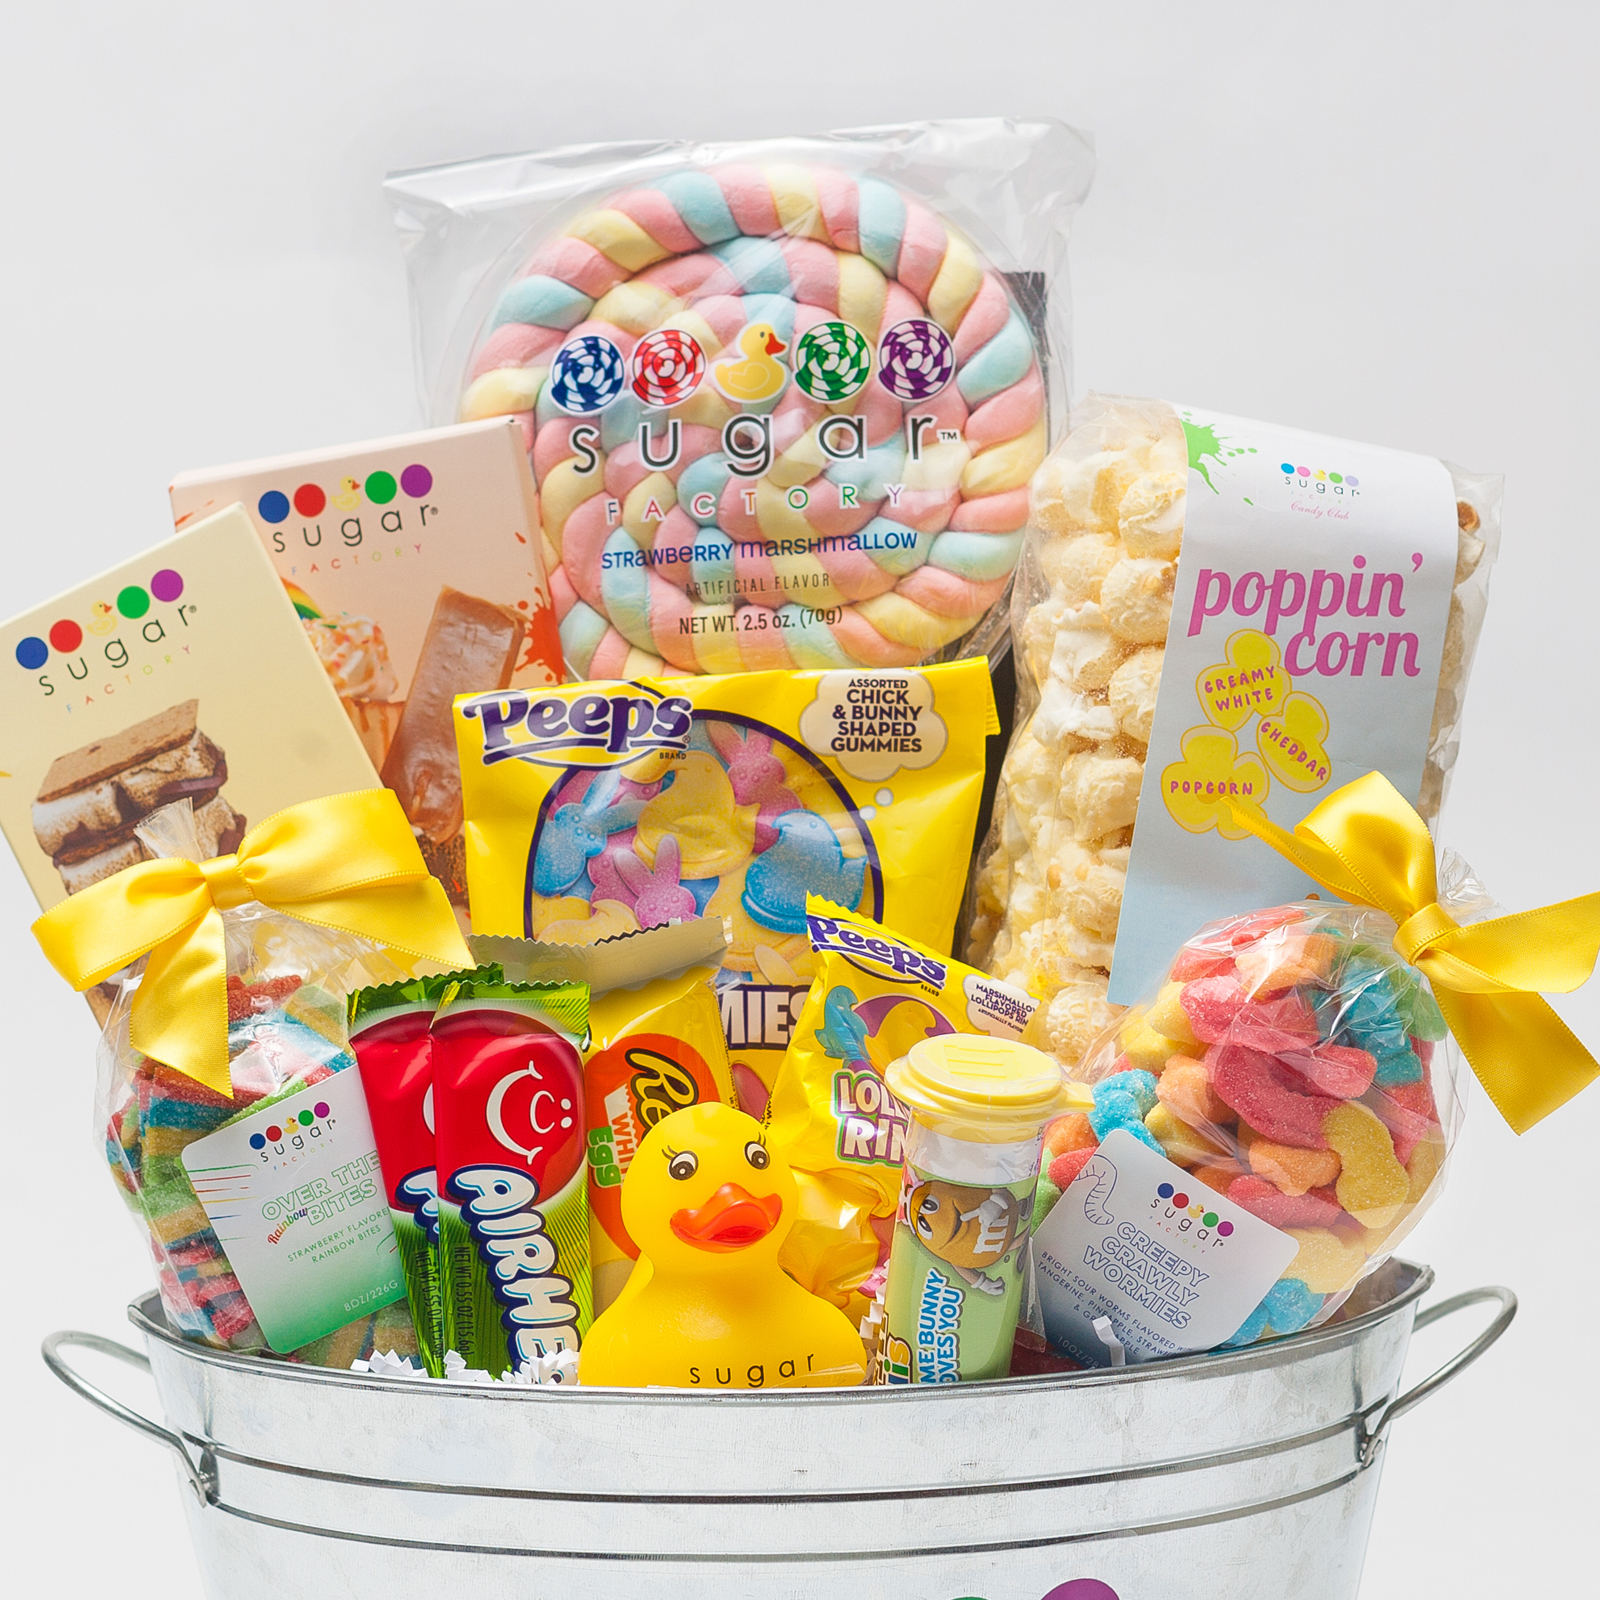 An Easter basket from Sugar Factory